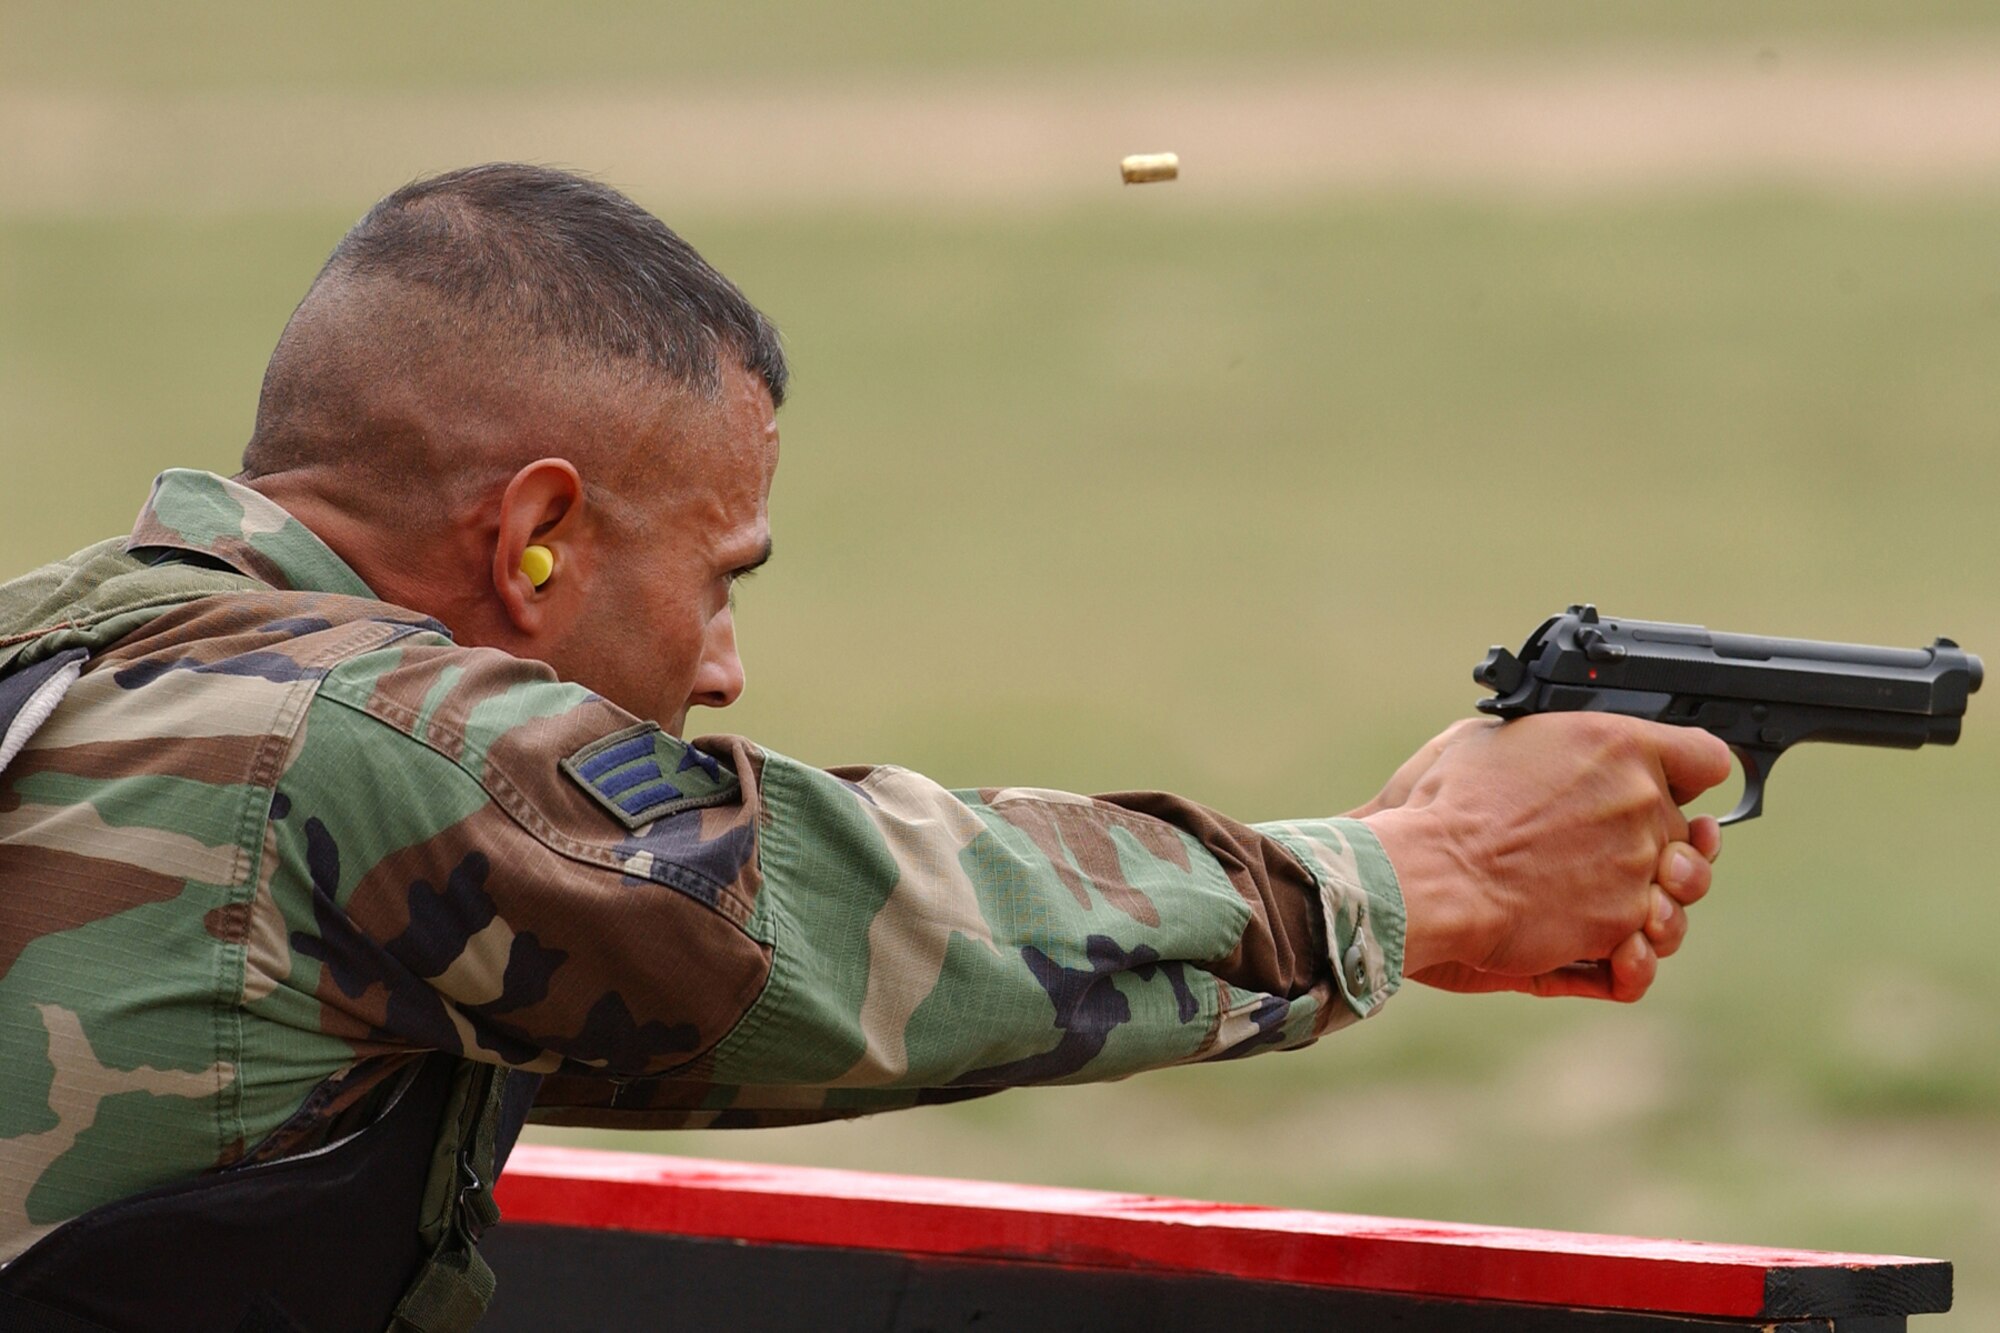 Senior Airman Romy Villescas of the 460th Security Forces Squadron, Buckley Air Force Base, Colo., fires a 9-mm pistol during the marksmanship portion of Guradian Challenge 2006.  